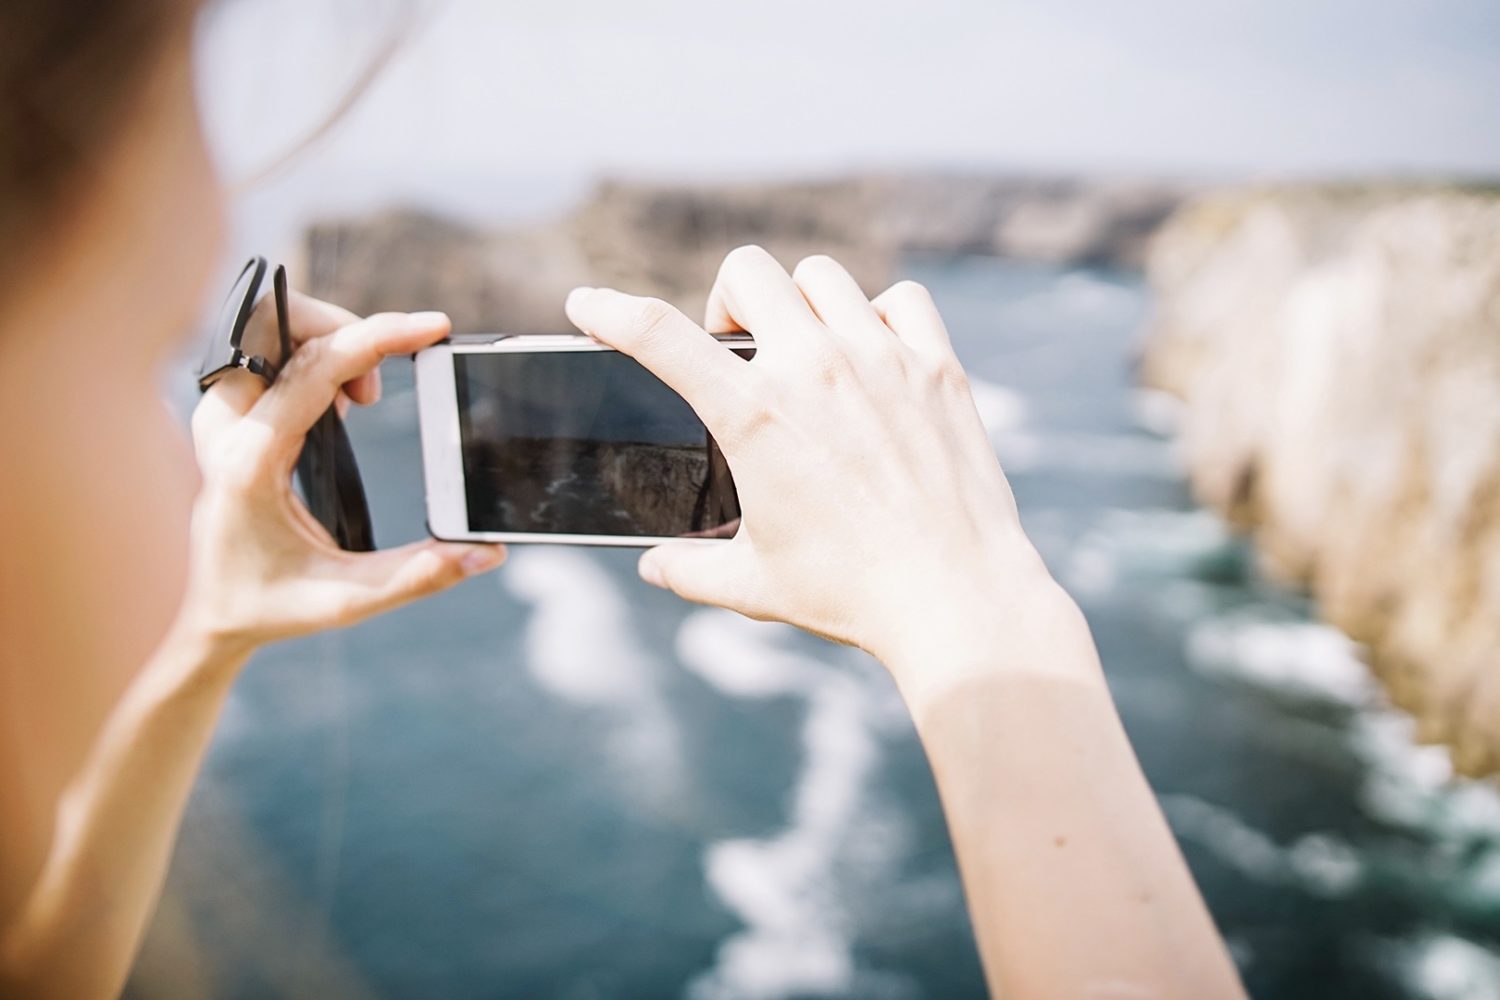 How to capture licensable photos on mobile